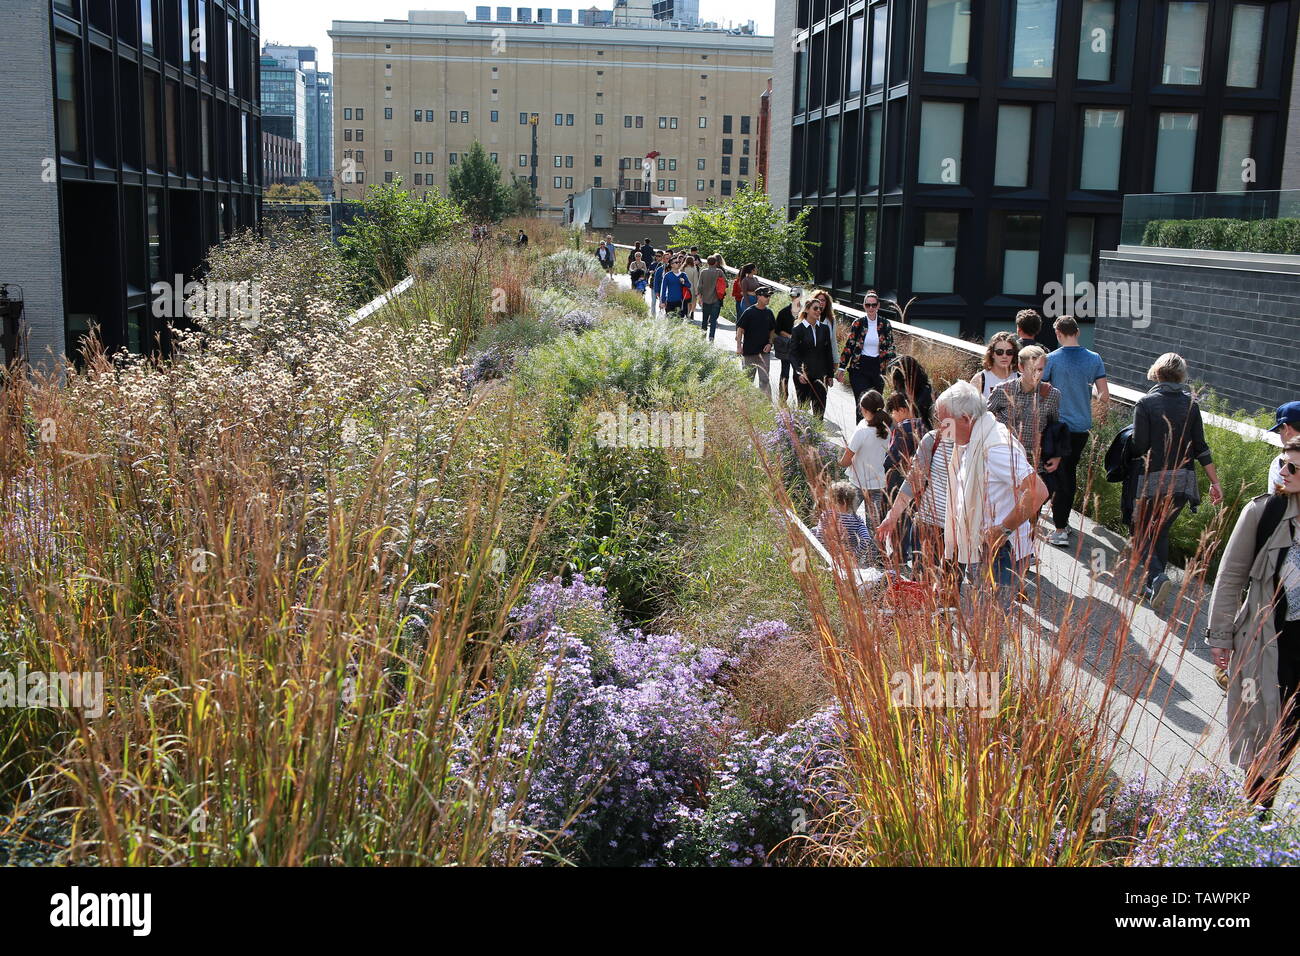 nidentified tourists visit the high line park in New York on  Thehigh line park built in Manhattan on an elevated section of a disused new york centra Stock Photo